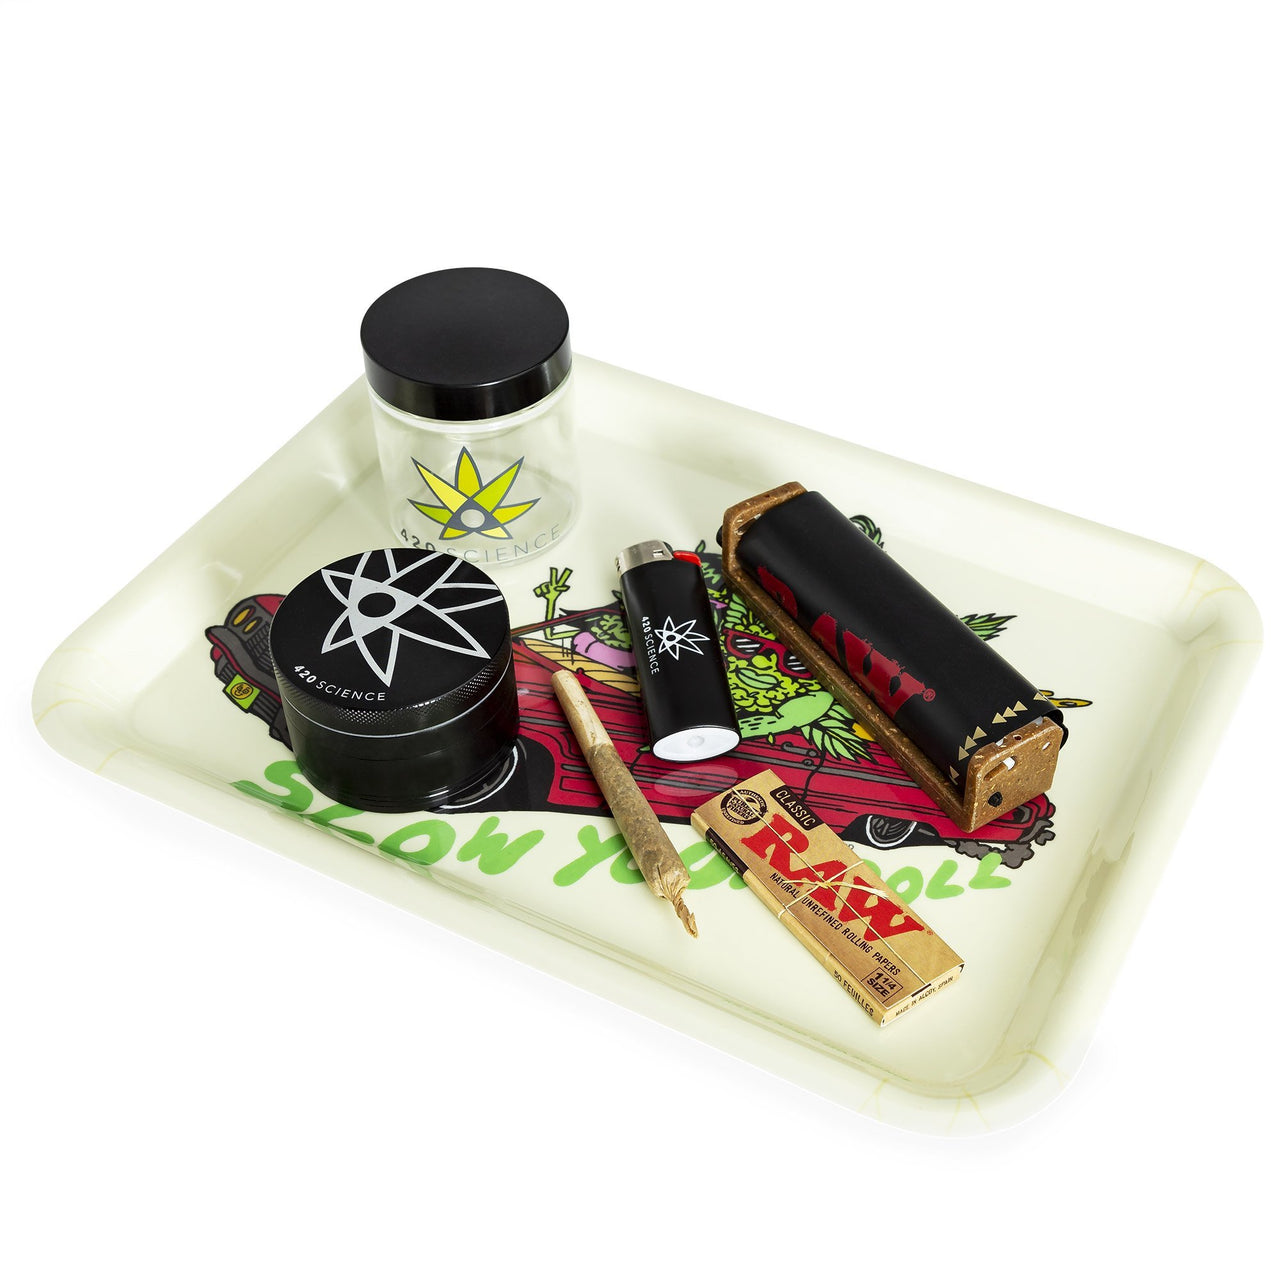 420 Science x Killer Acid Rolling Tray - Slow Your Roll - 420 Science - The most trusted online smoke shop.